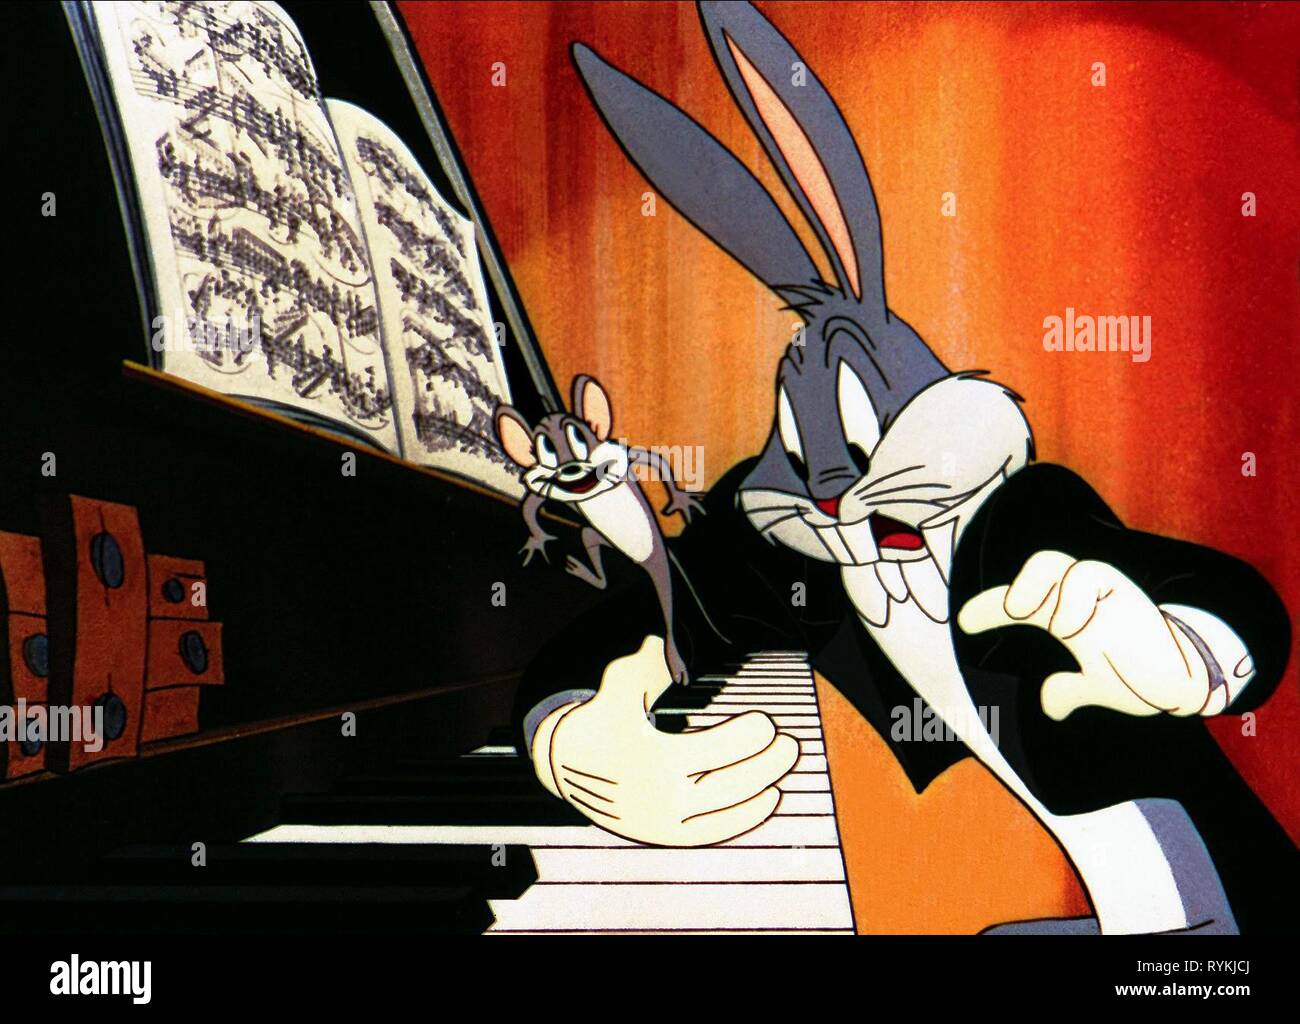 Bugs Bunny Bugs Bunny Animation High Resolution Stock Photography and  Images - Alamy